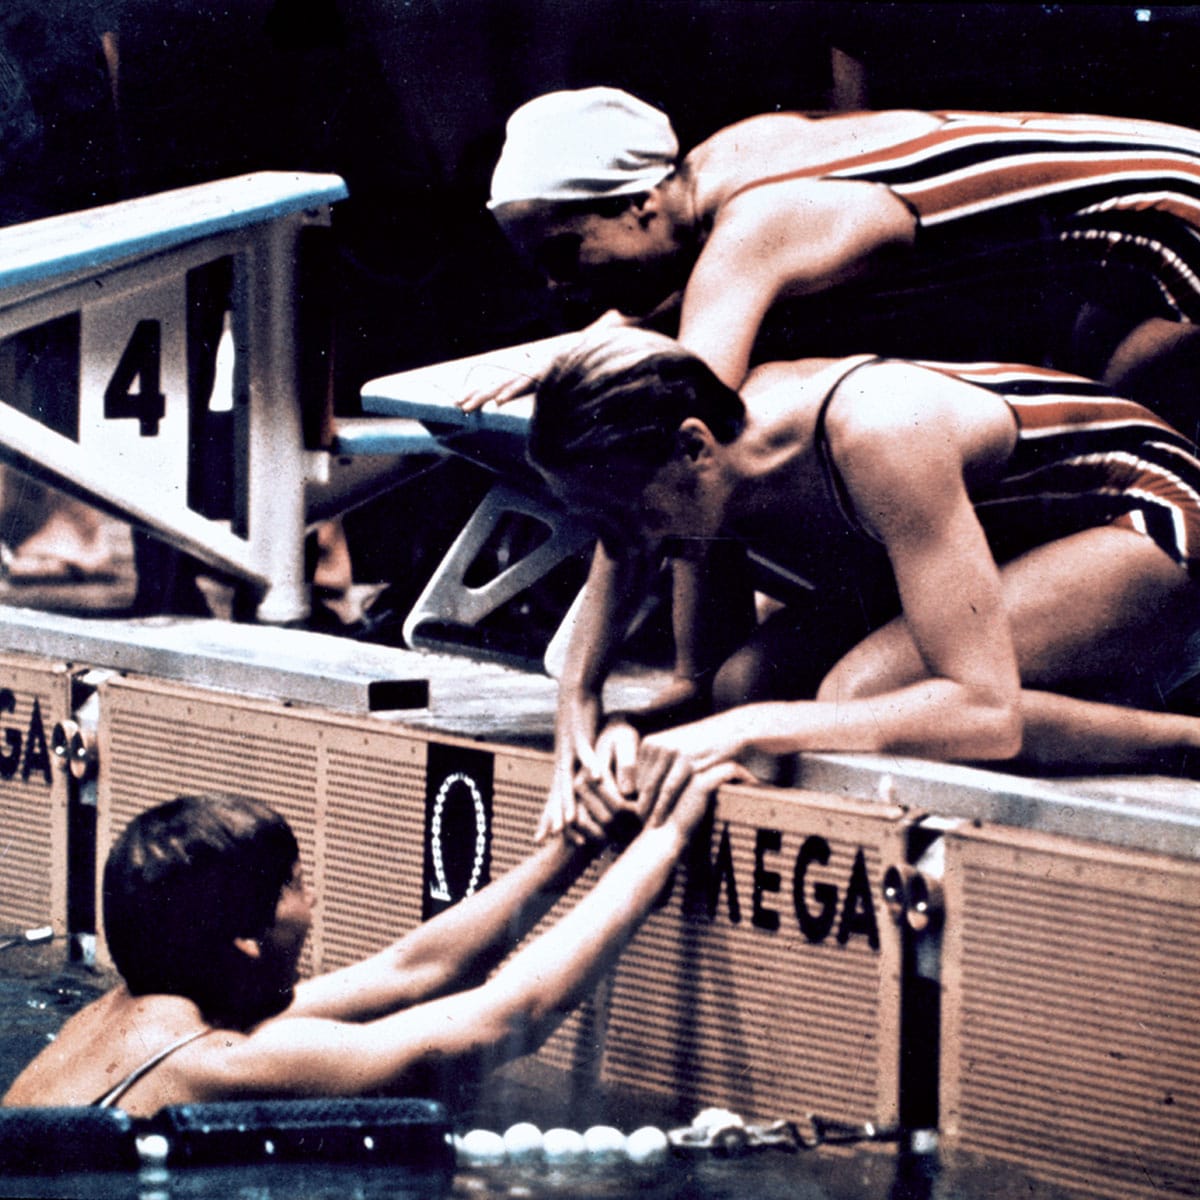 OMEGA swimming touchpad during the 1967 Pan-American games